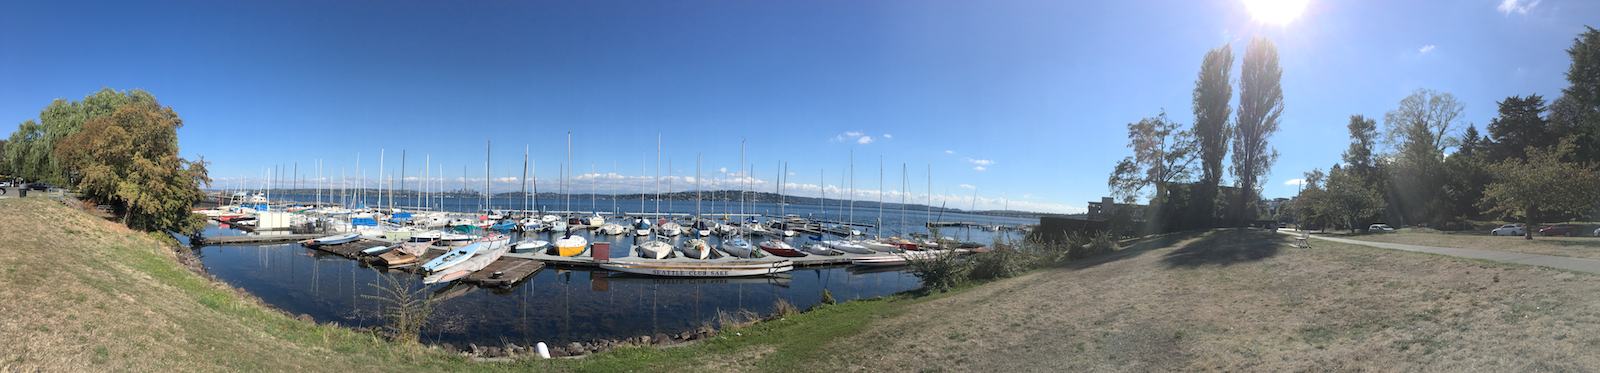 Leschi Marina south moorage seen from the
                        shore, panoramic view